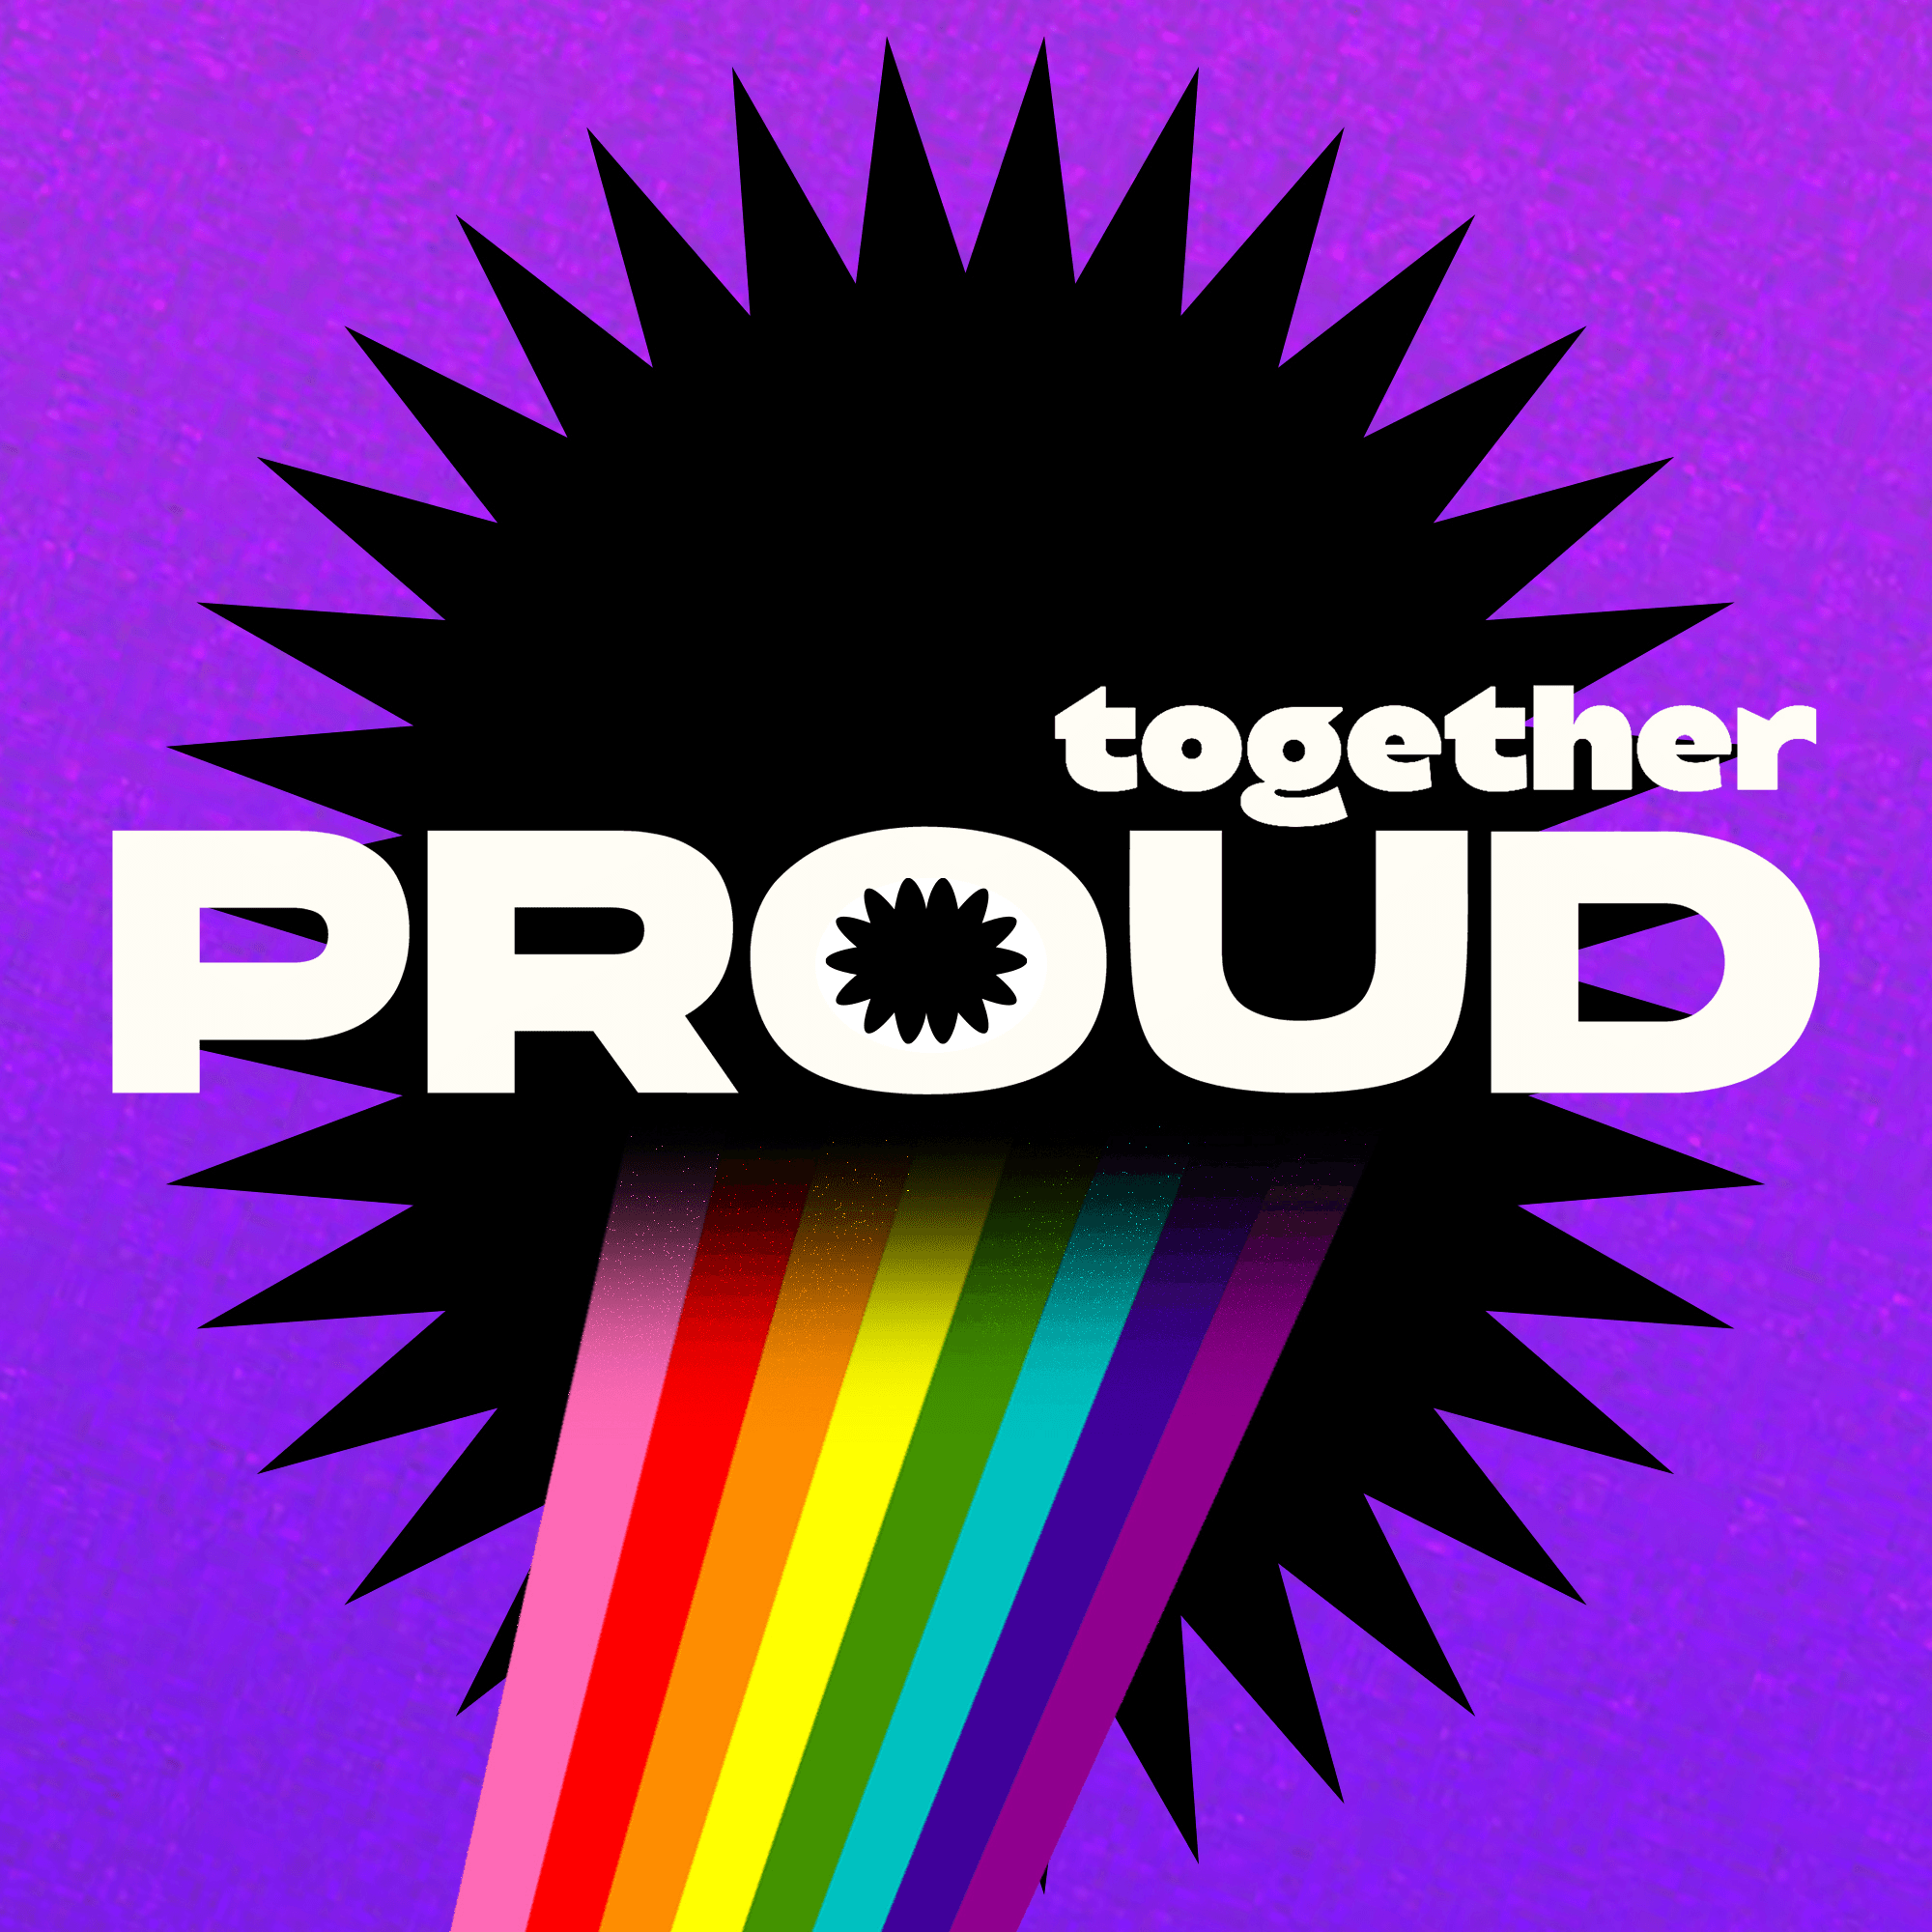 Proud together